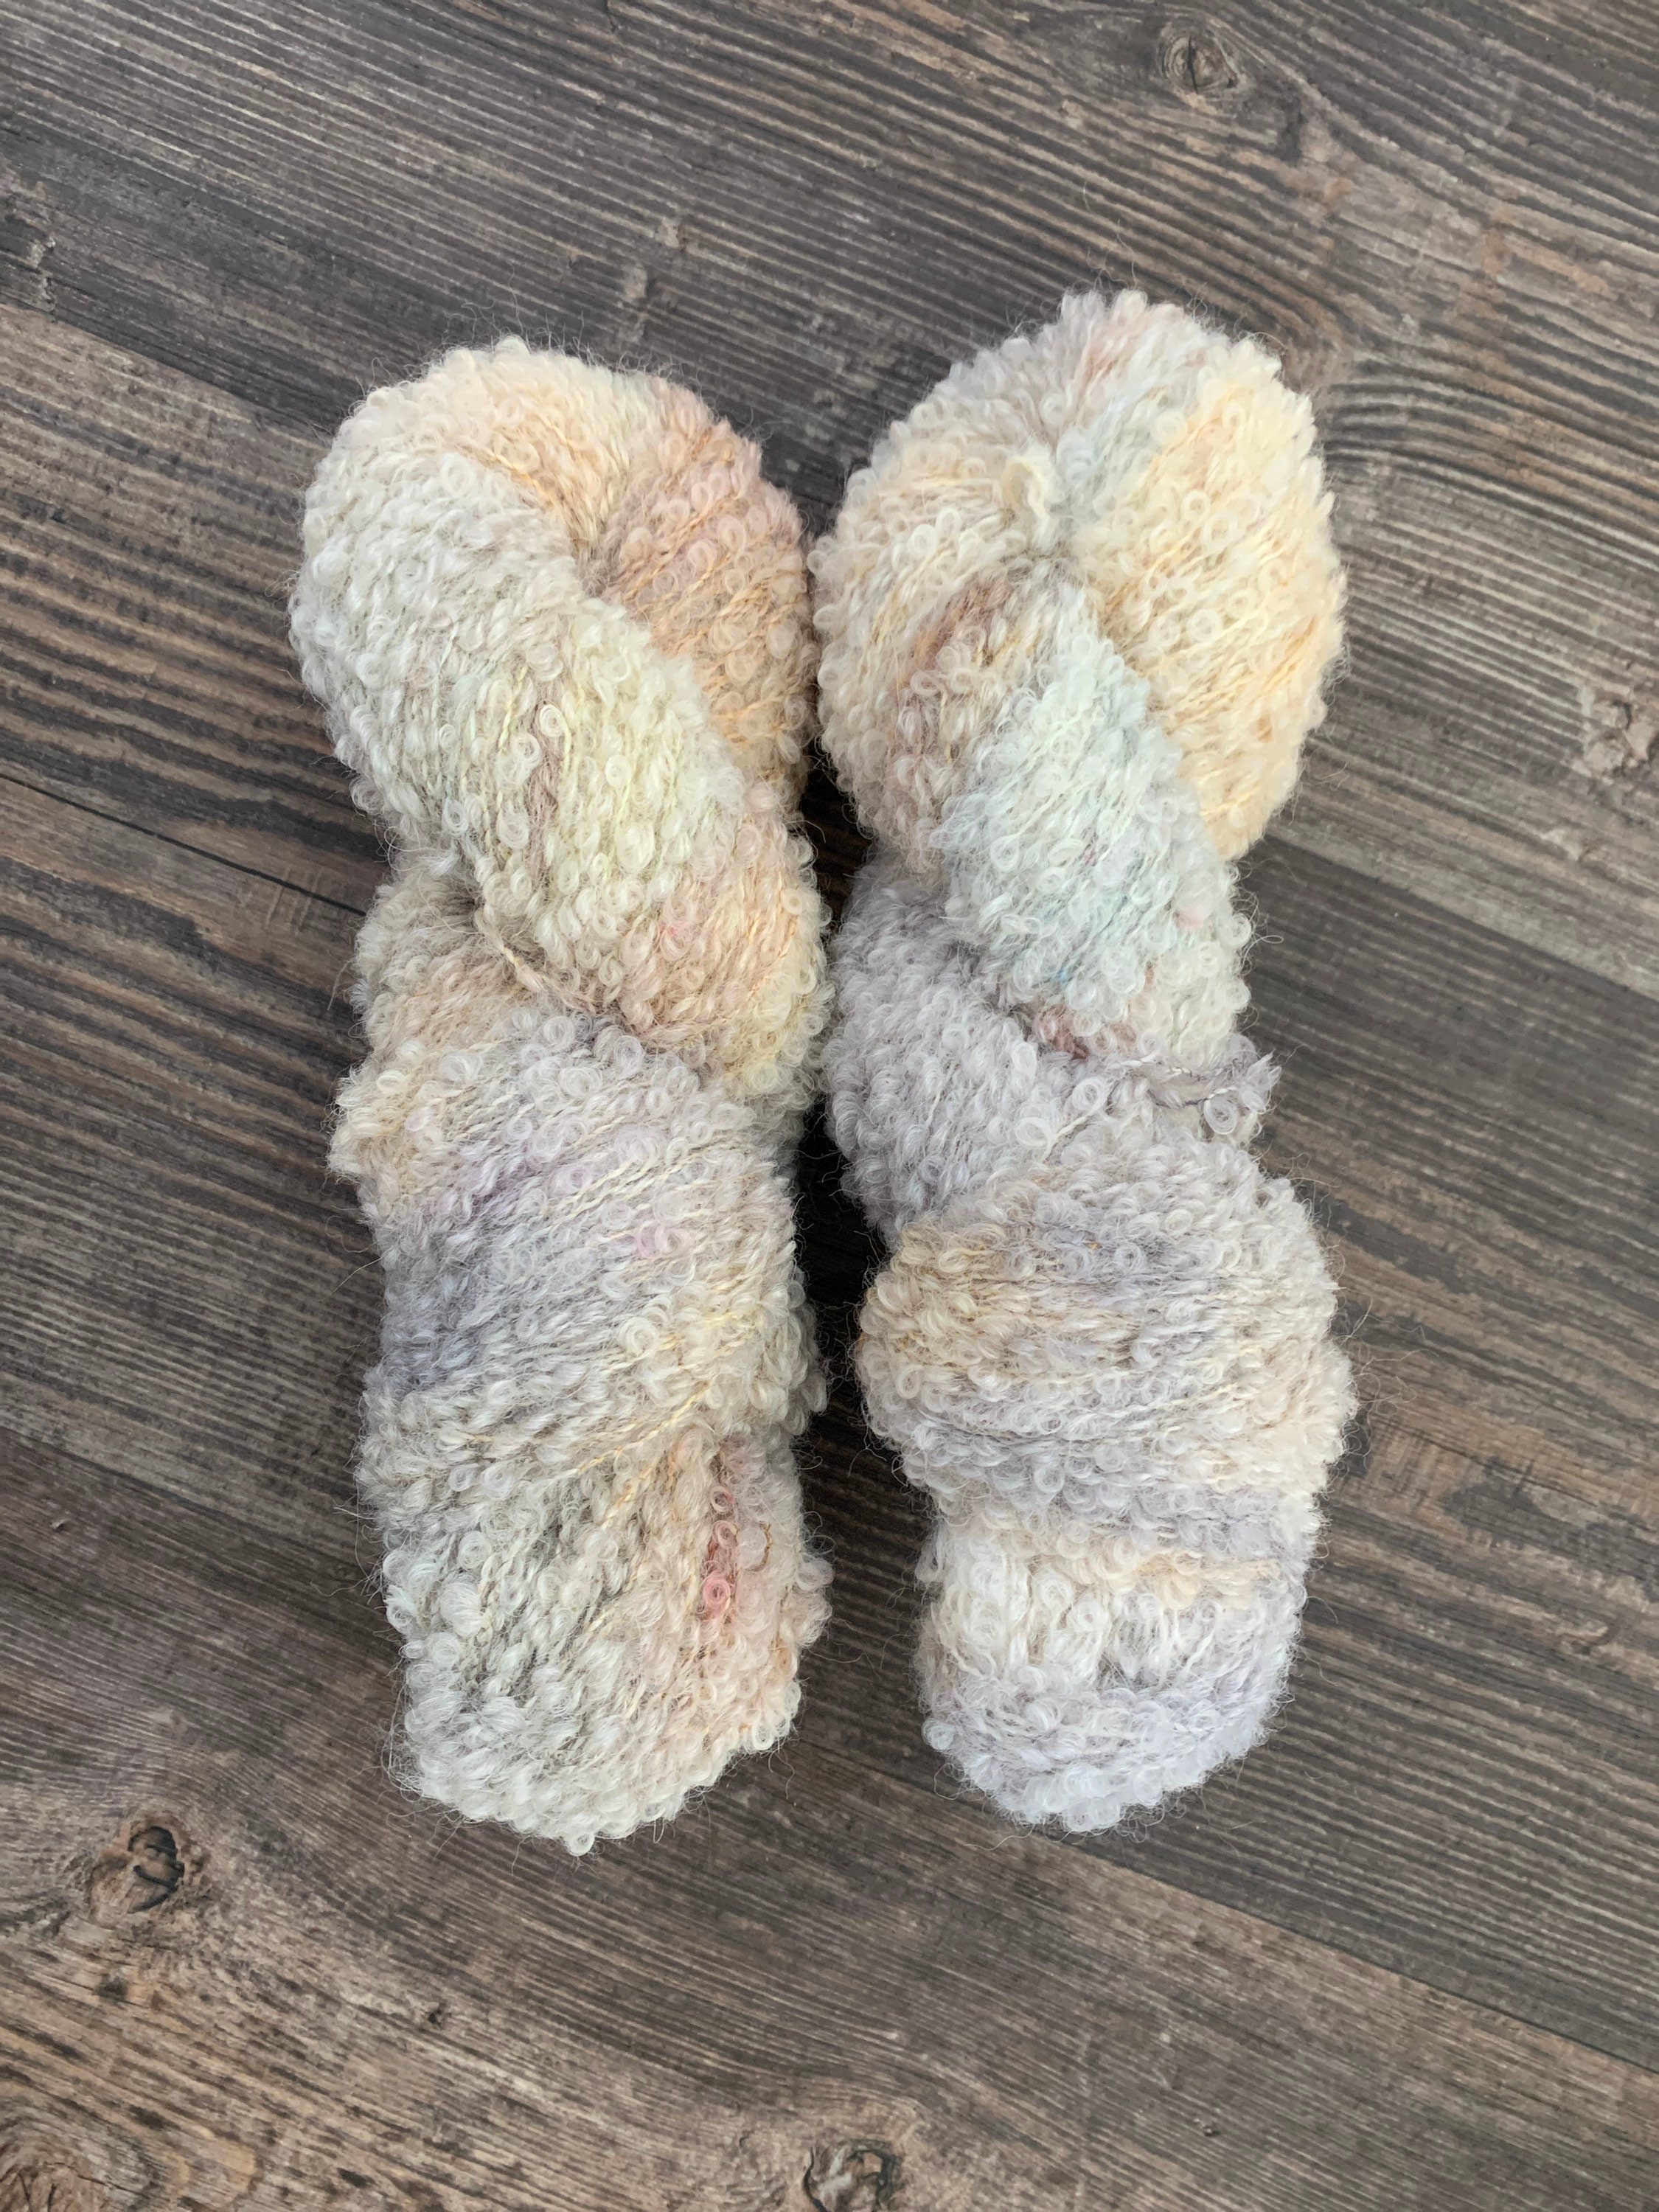 Baby Soft® Boucle Yarn - Discontinued